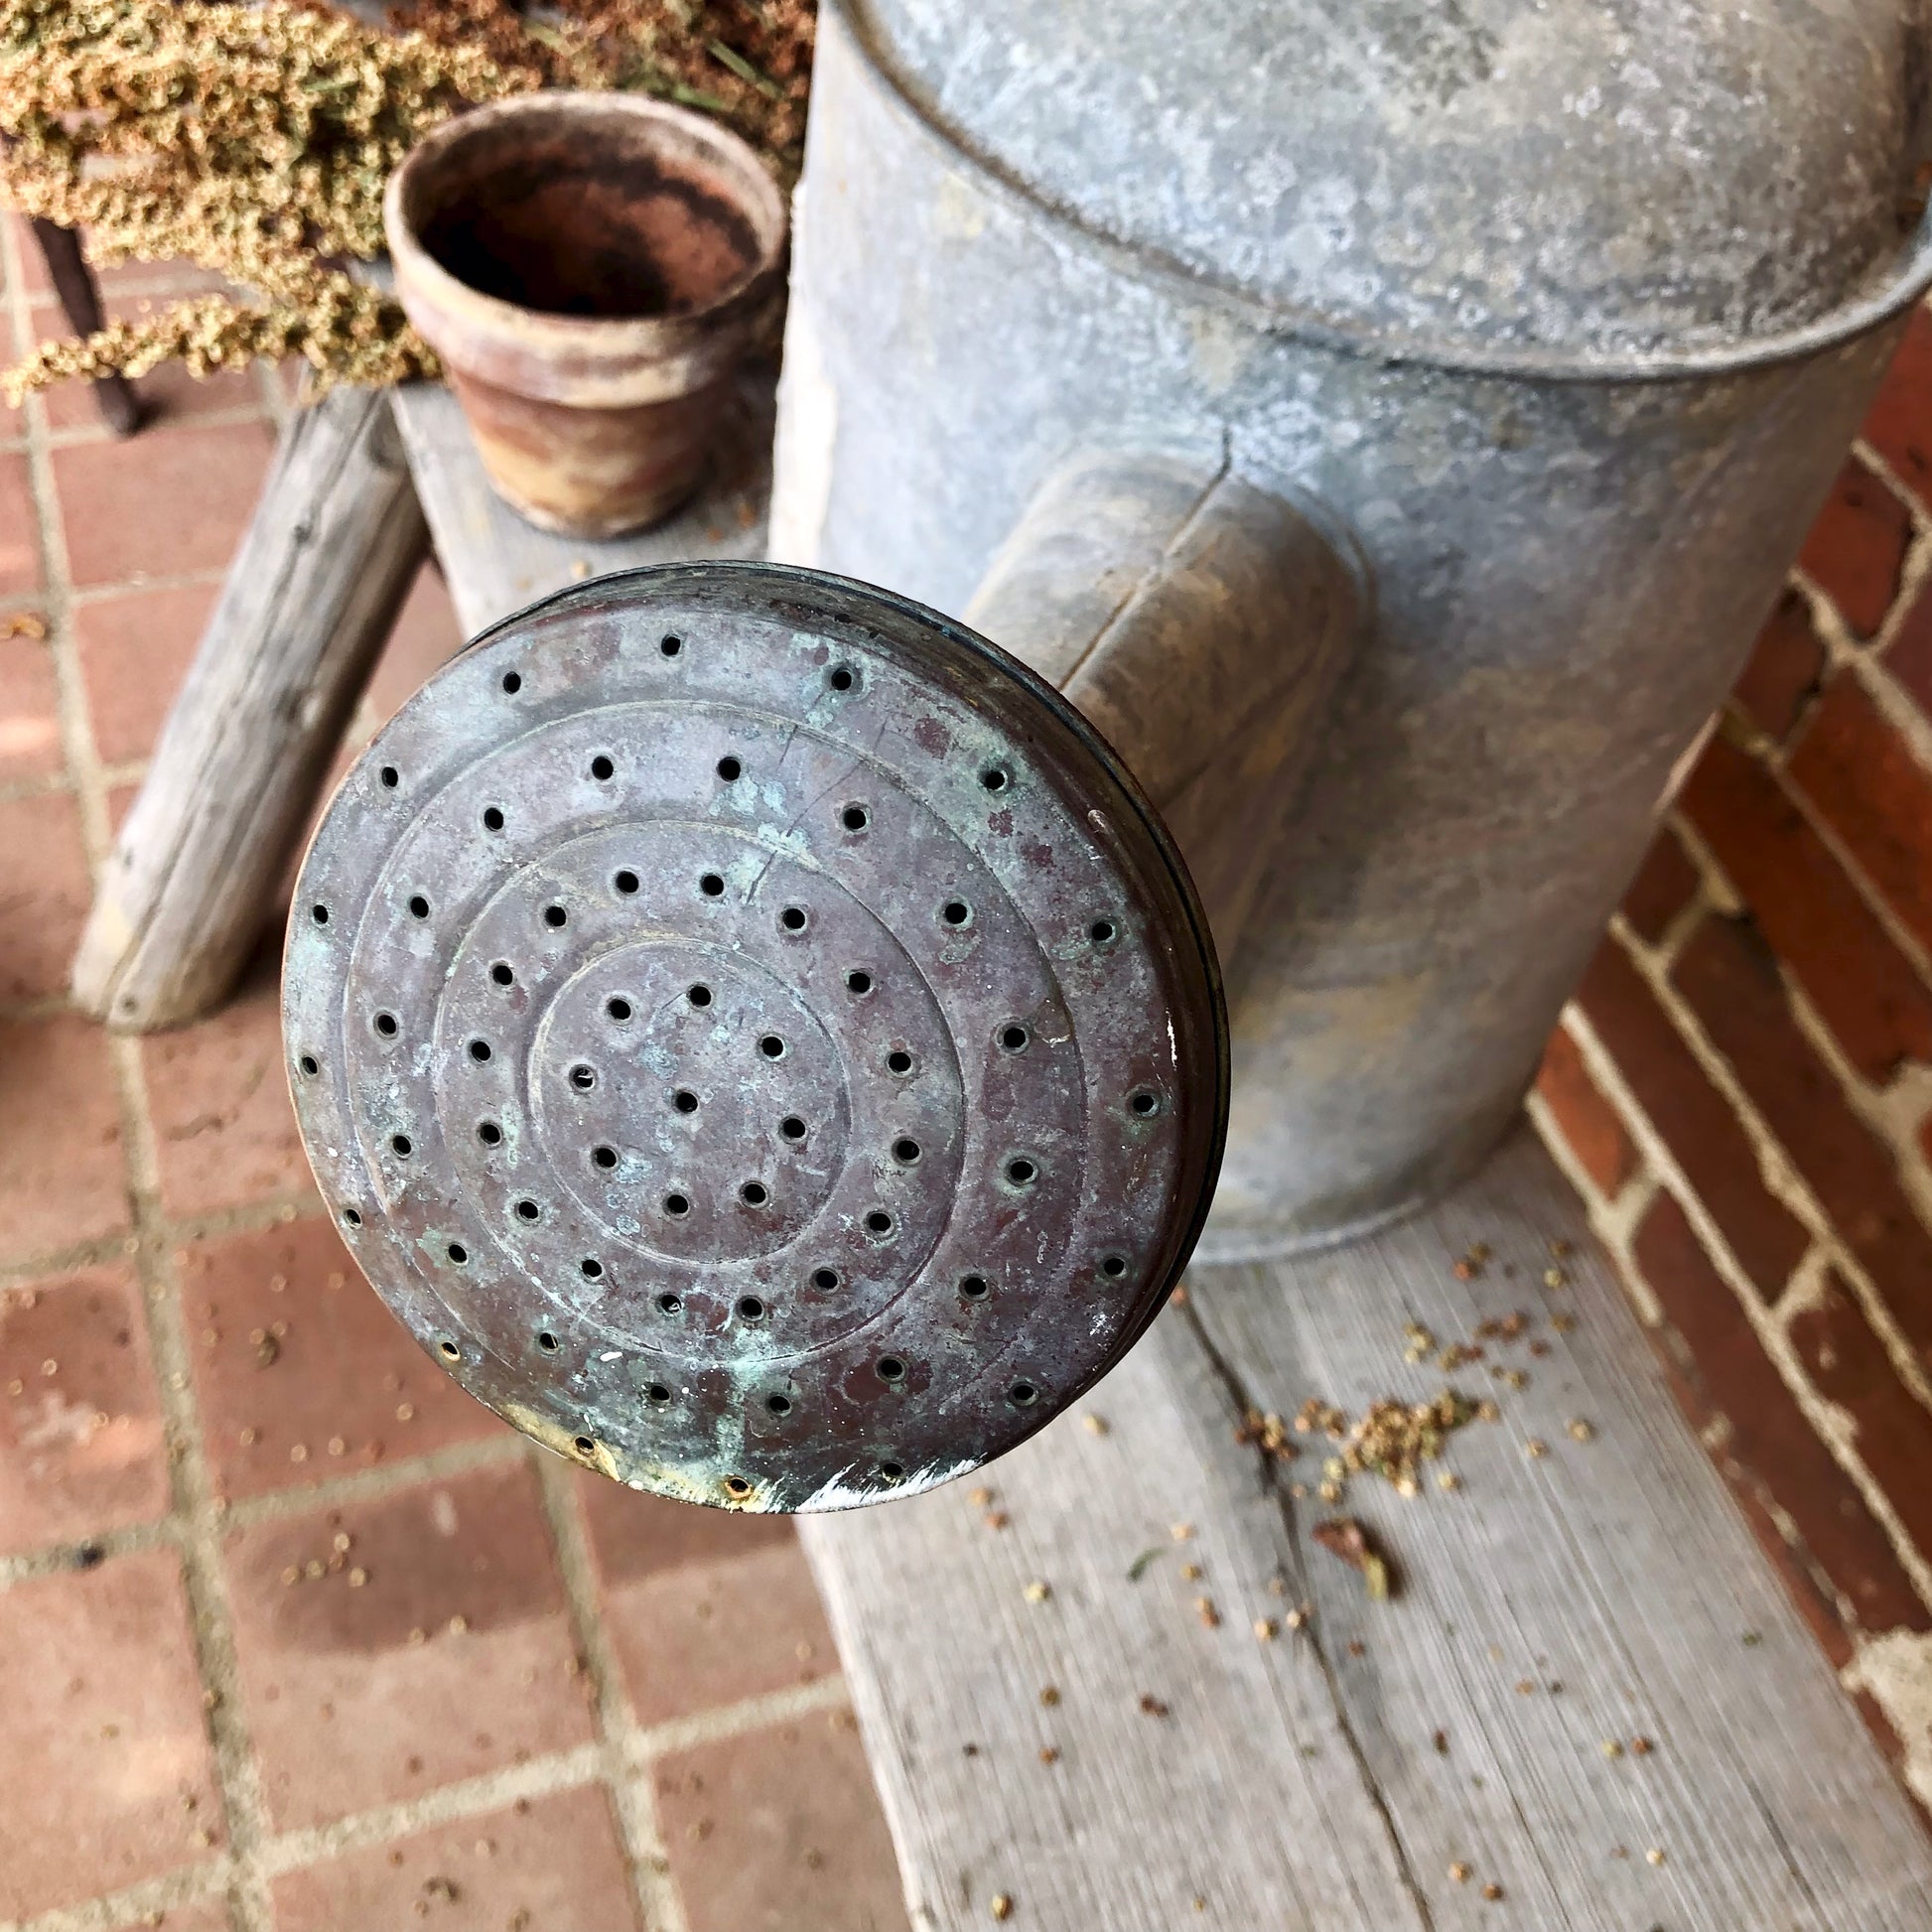 Large Galvanized Vintage Watering Can with Bail Handle (c.1900s)